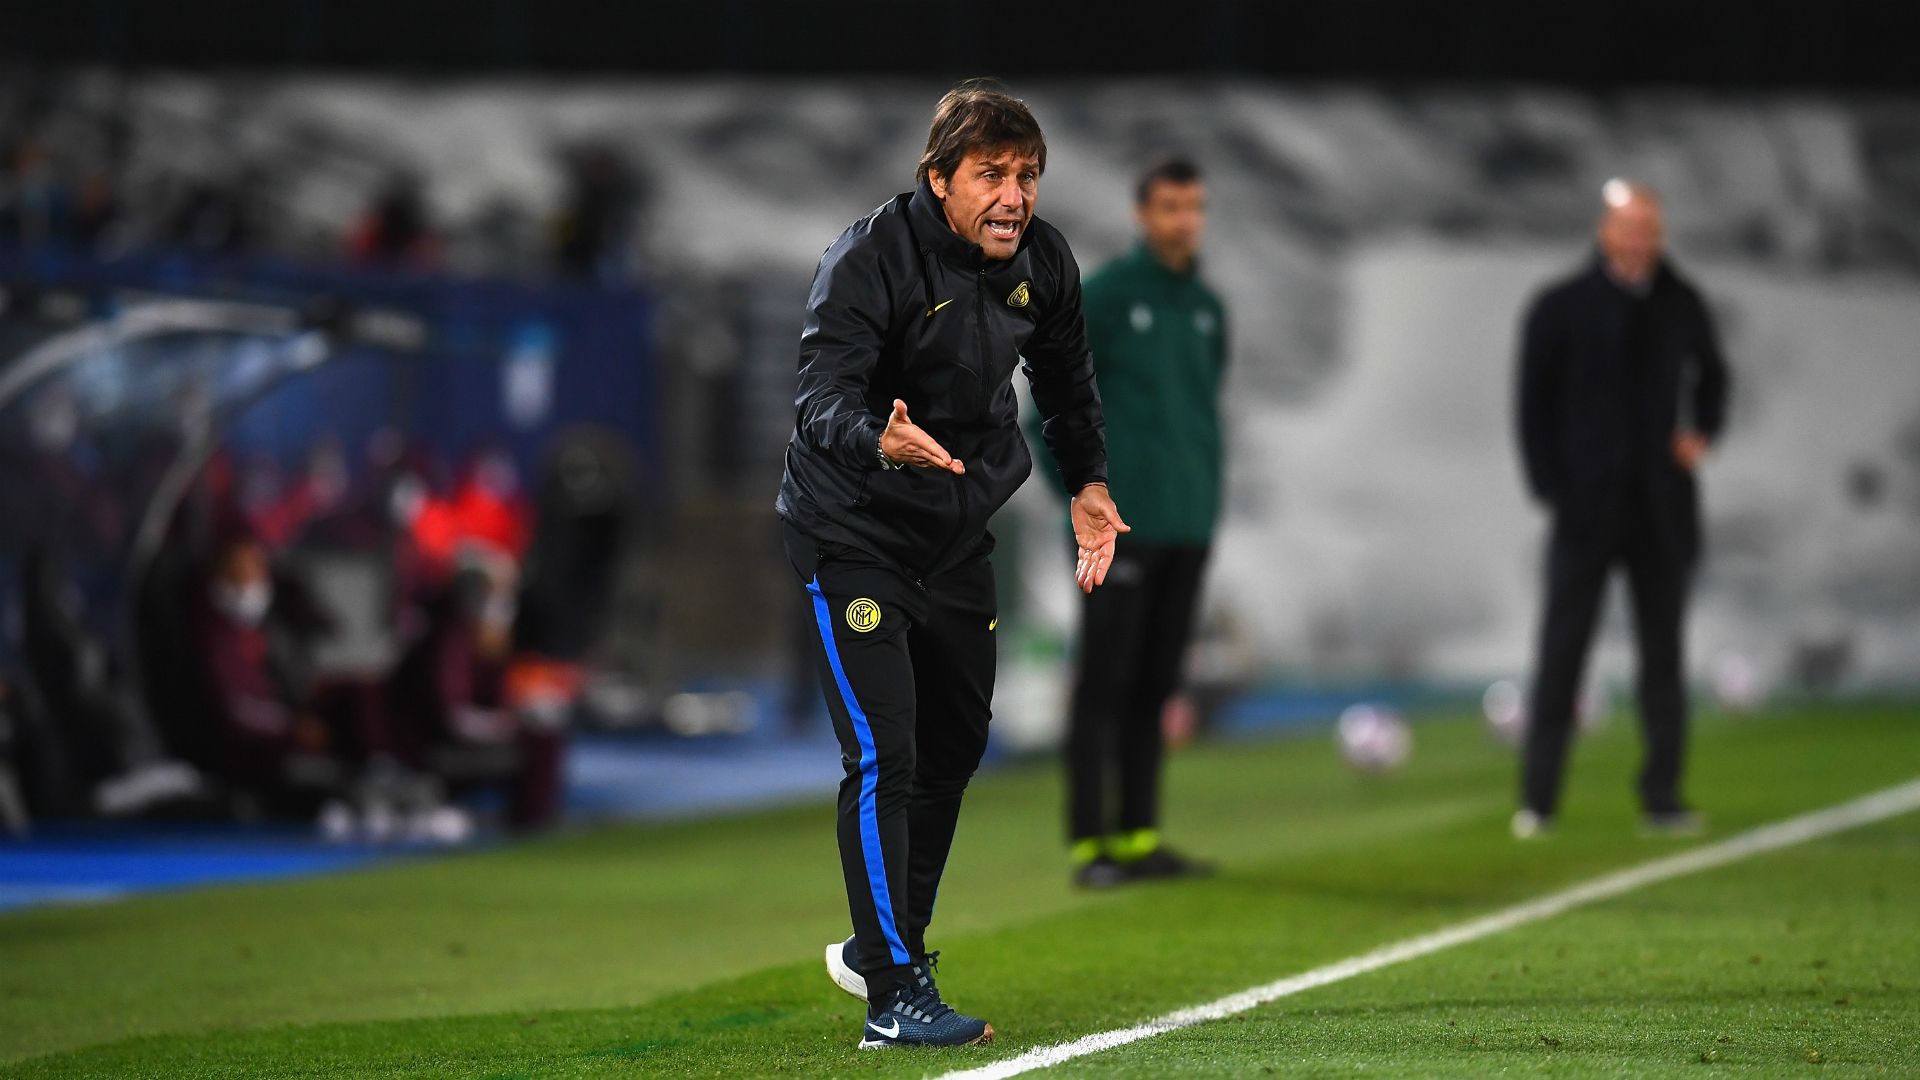 'I really liked the mentality and desire' - Conte remains hopeful of Champions League progression for Inter